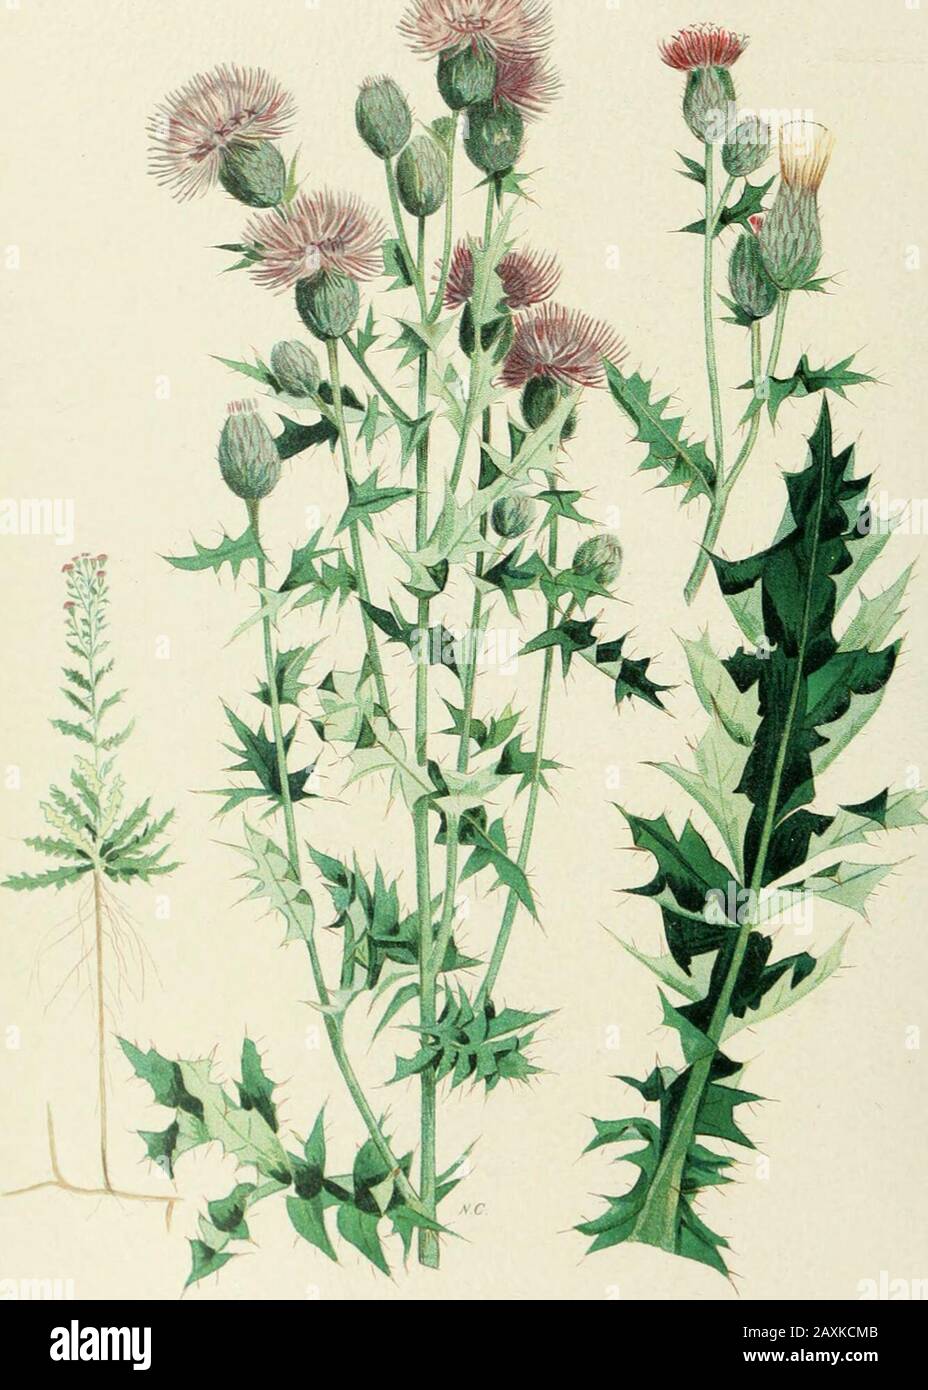 Farm weeds of Canada . flowers. The seeds are long and narrow, spindle-shaped, the upper end blunt and slightly enlarged by the white apical scar;surface finely ridged lengthwise, and covered with short white bristles, inthis way differing from the seeds of the similar Stinking Groundsel, Senecioviscosus, L., which occurs in the Maritime Provinces with the CommonGroundsel, and, although the whole plant is viscid pubescent, has its ratherlonger seeds entirely without bristles; its flower-heads also bear distinctmarginal ray-florets. The Common T.^nst. Tanacetum vulgare, L., is quite a different Stock Photo